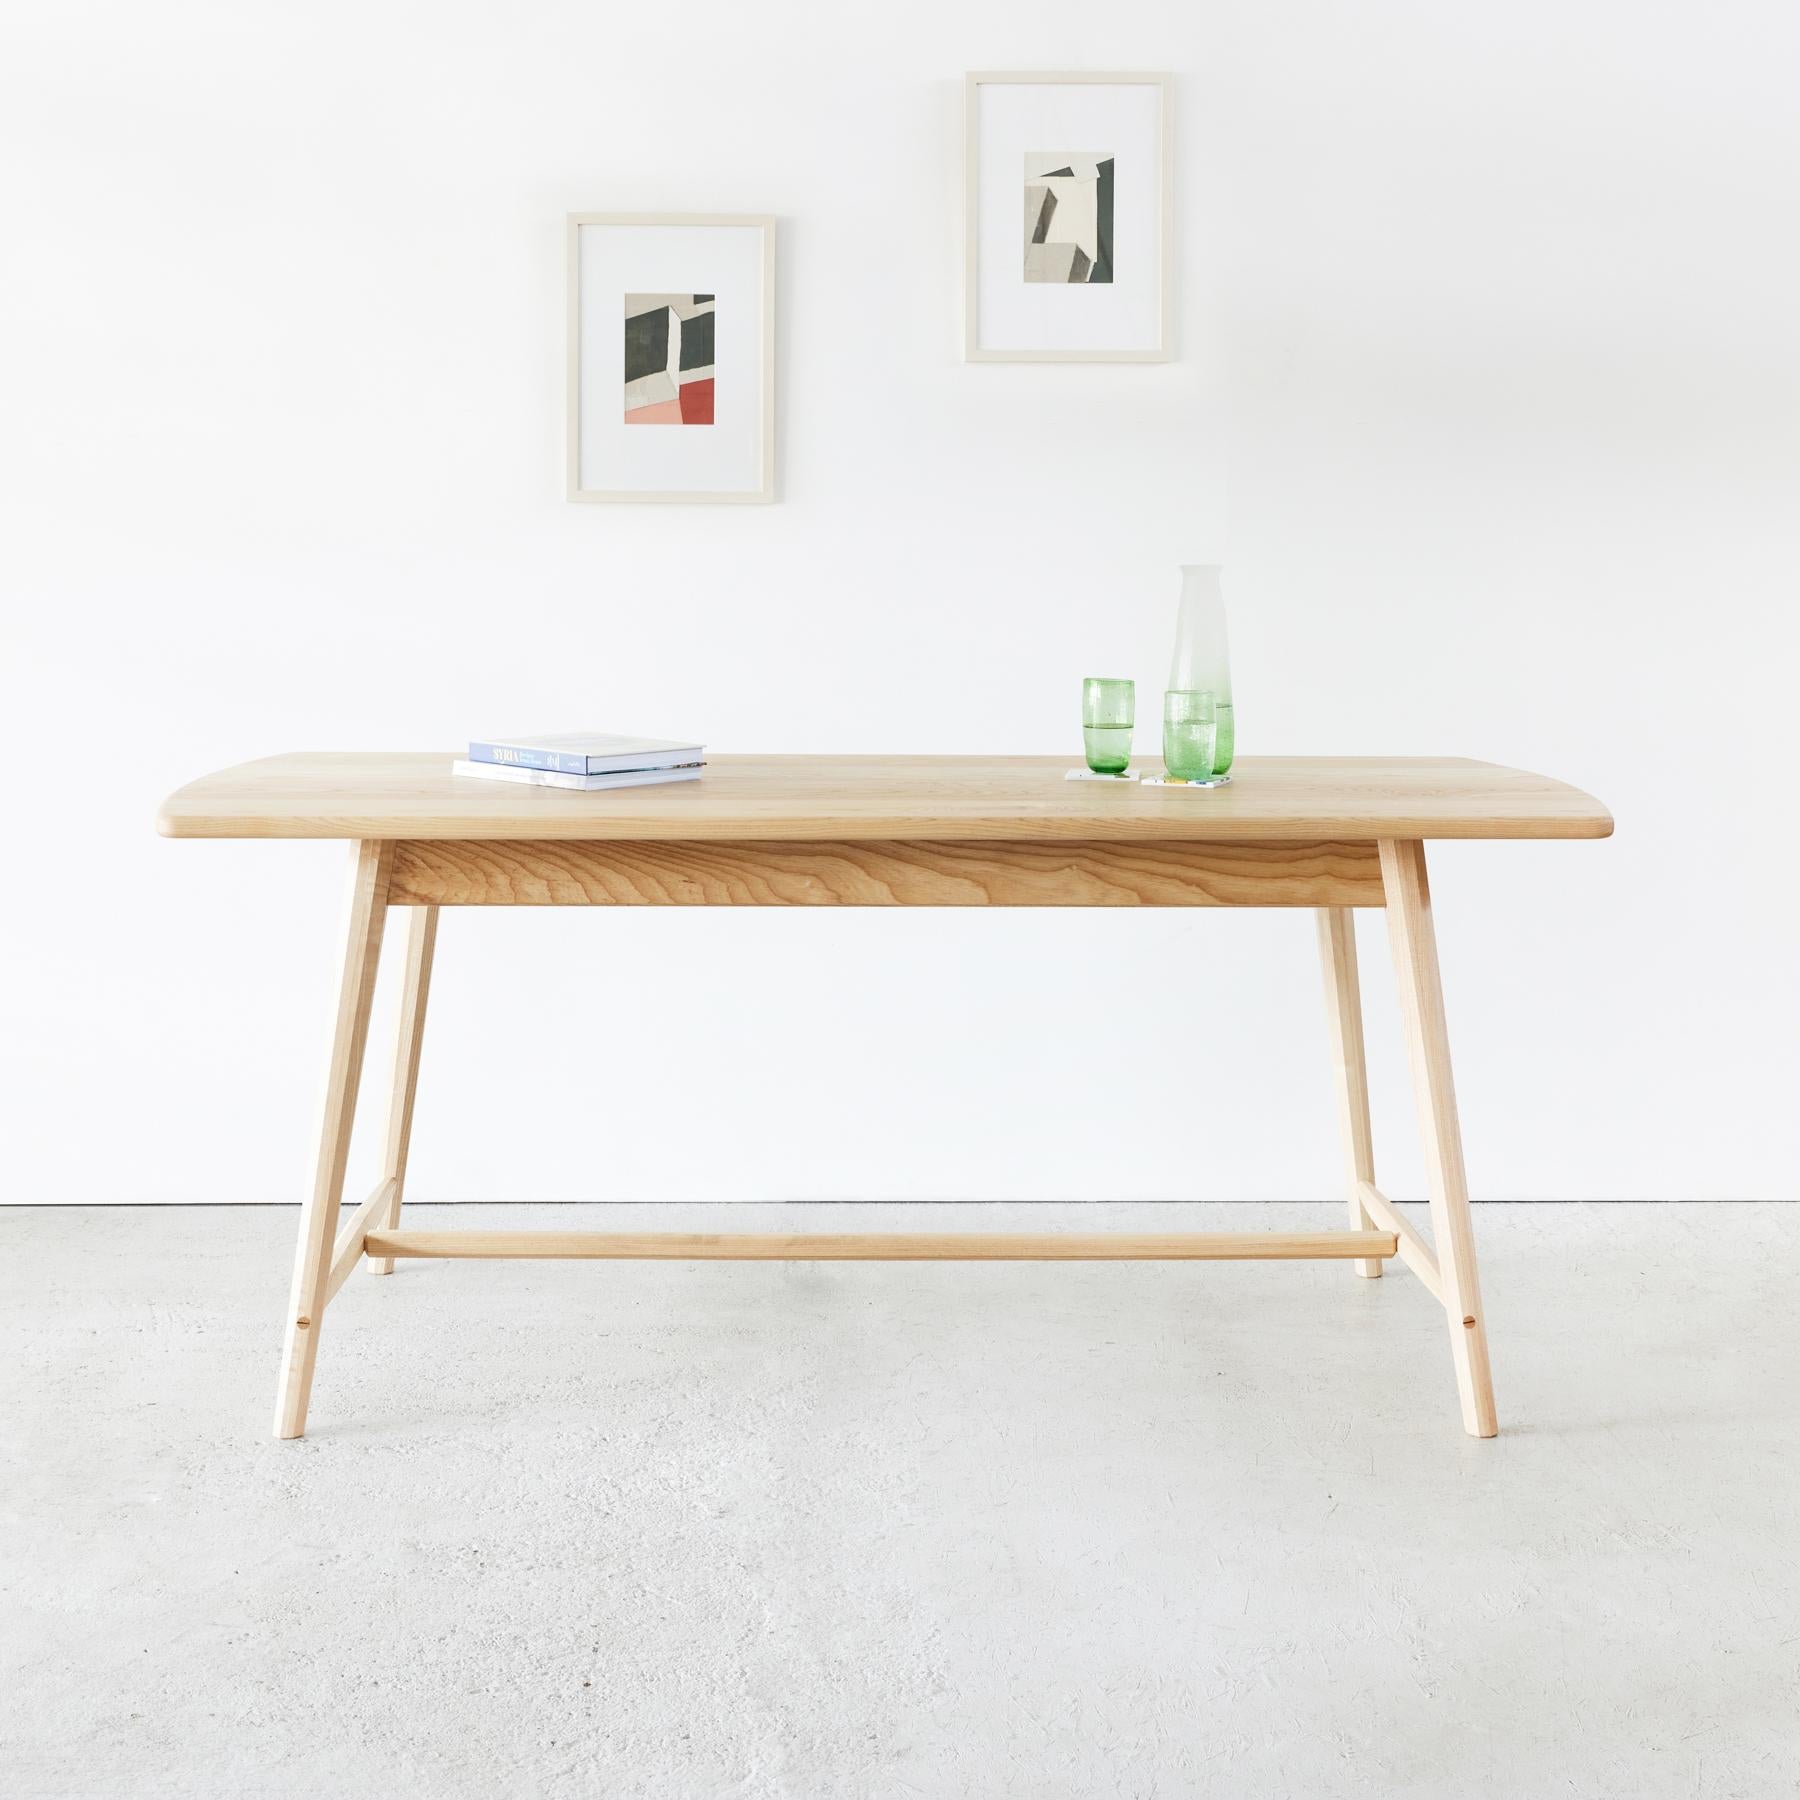 The Arden dining table exudes subtle elegance, with a careful application of traditional joinery. Made using hand-cut exposed wedged tenons, its minimalist structure creates an unobtrusive yet solid piece, perfect for modern, design-led